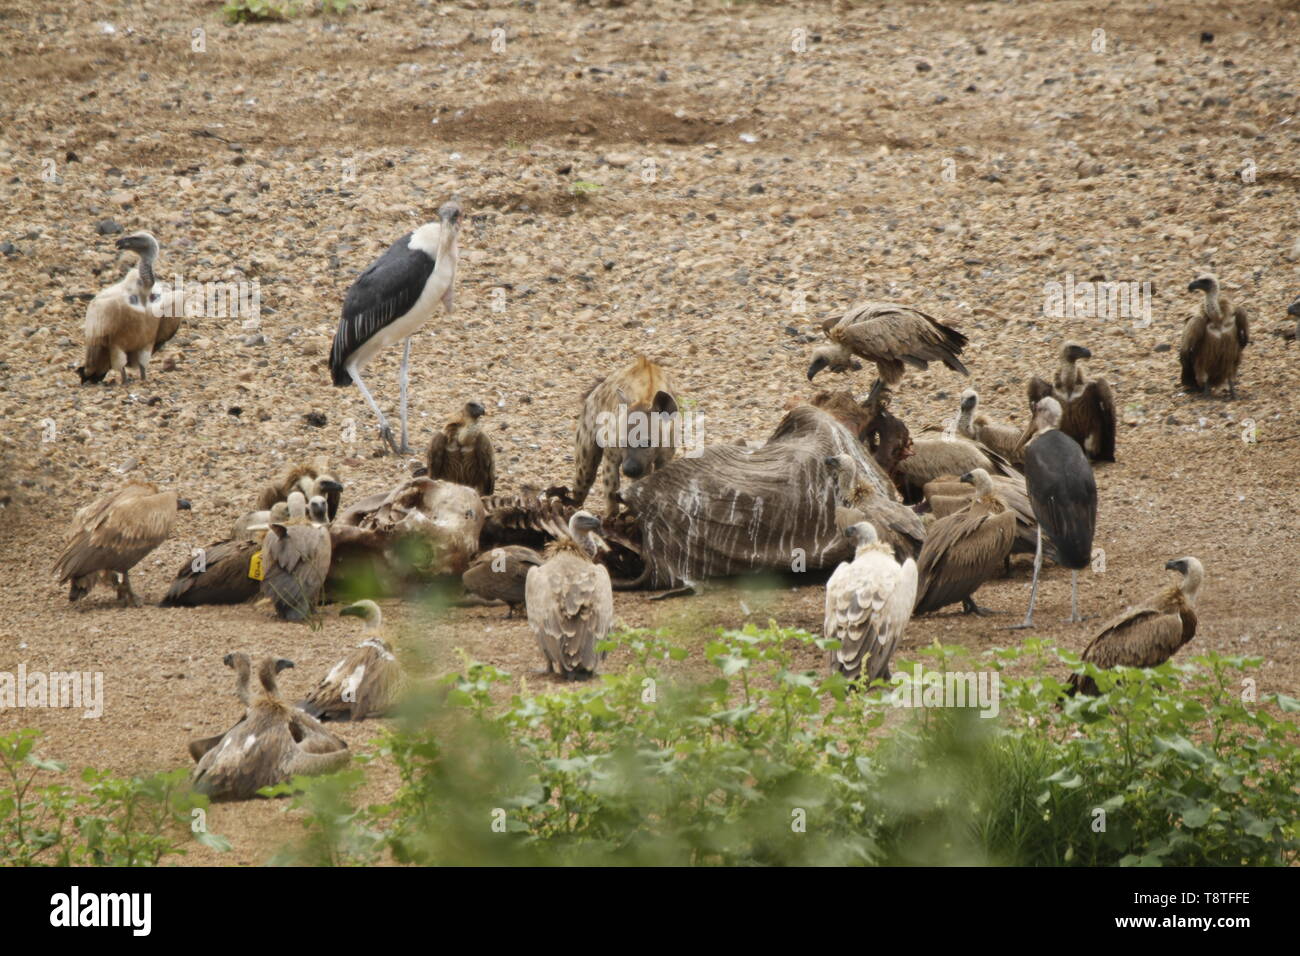 Vultures and hyena on carcass Stock Photo